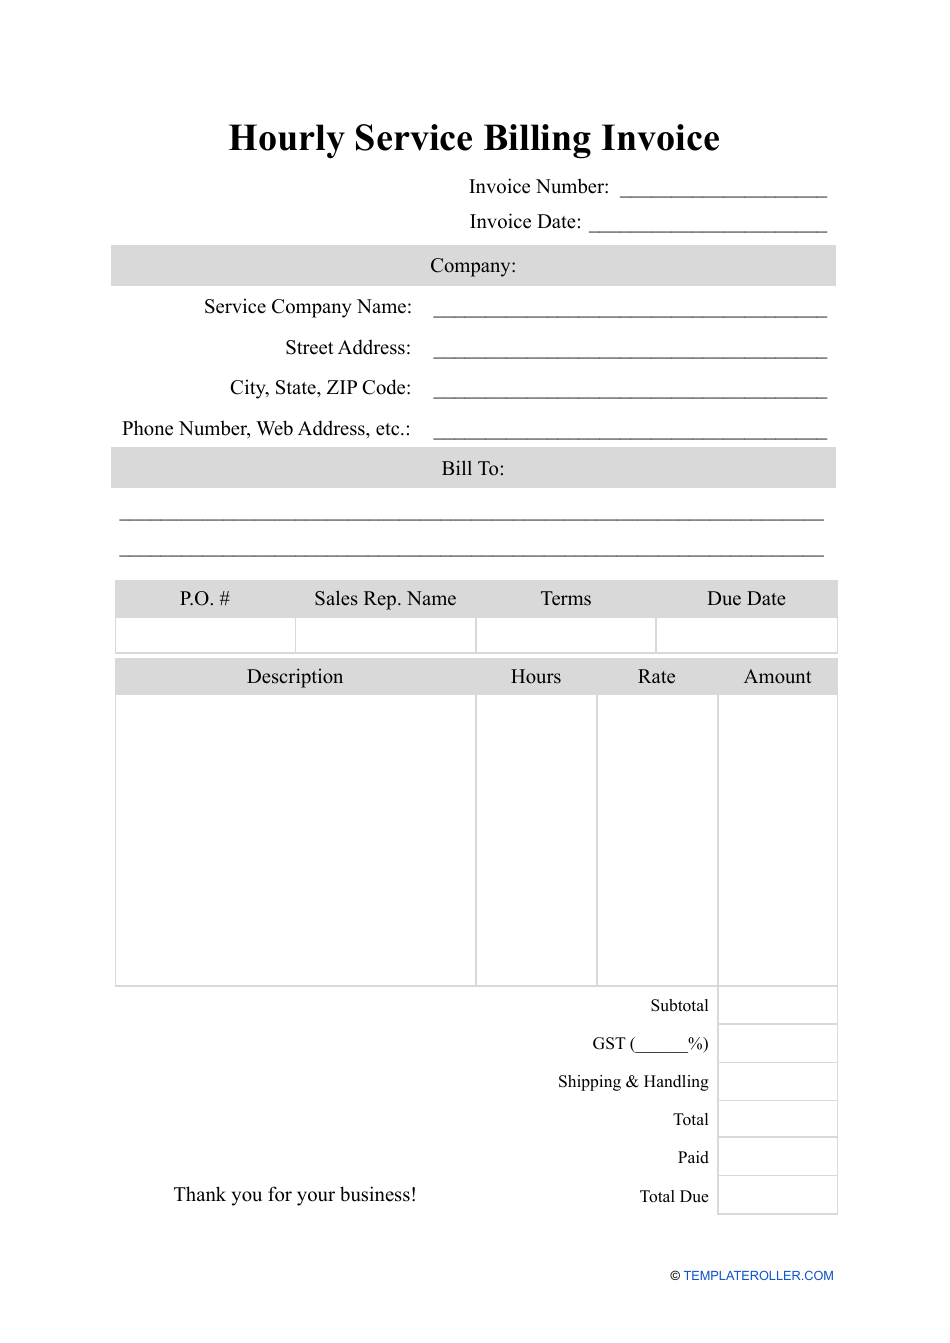 Hourly Service Billing Invoice Template, Page 1